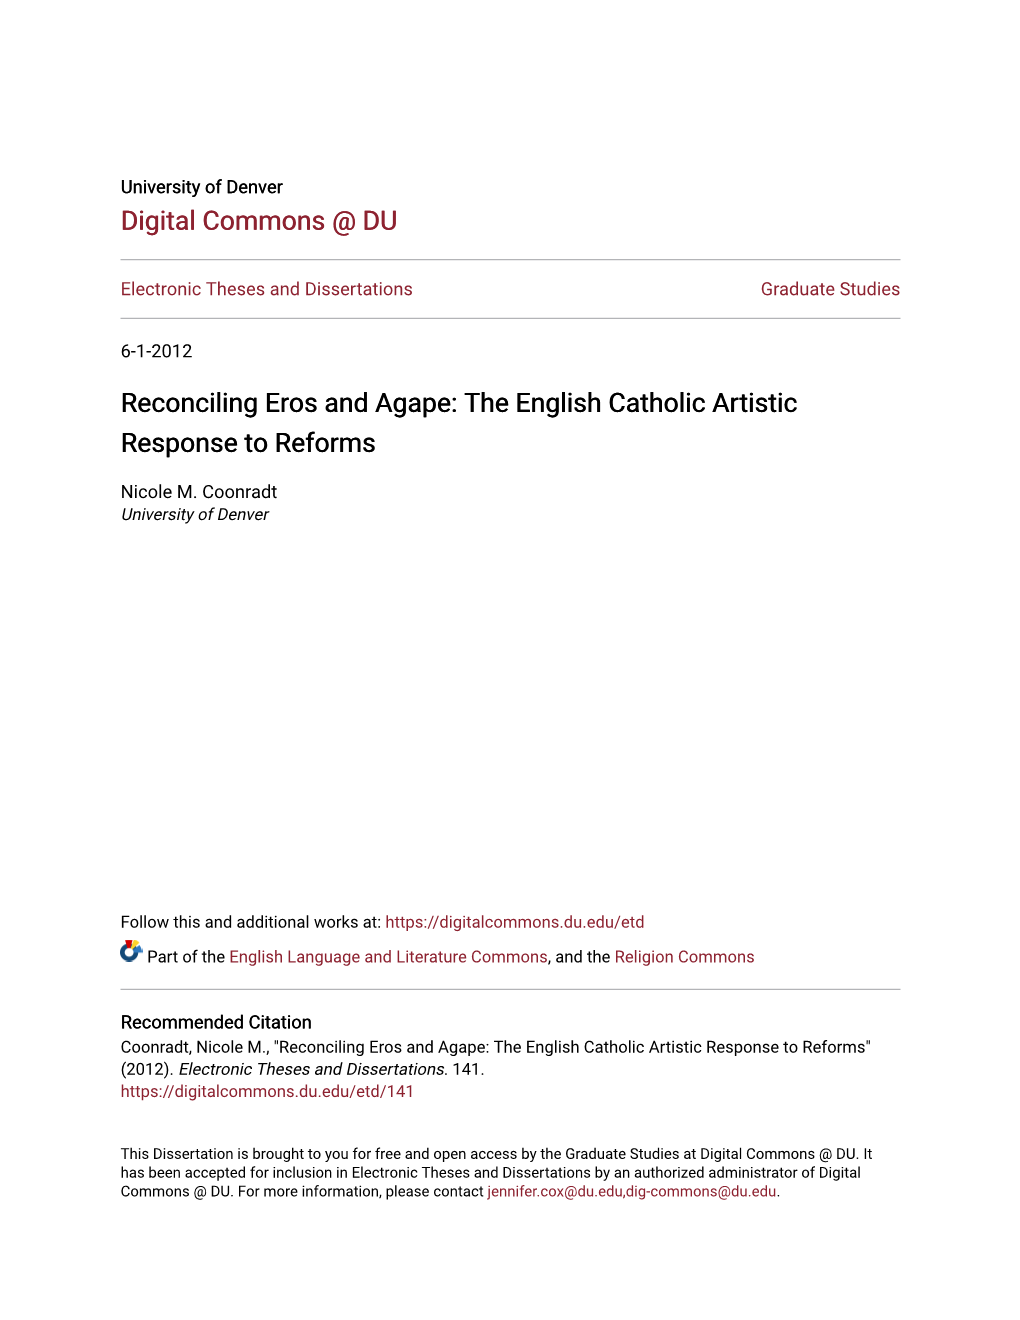 Reconciling Eros and Agape: the English Catholic Artistic Response to Reforms